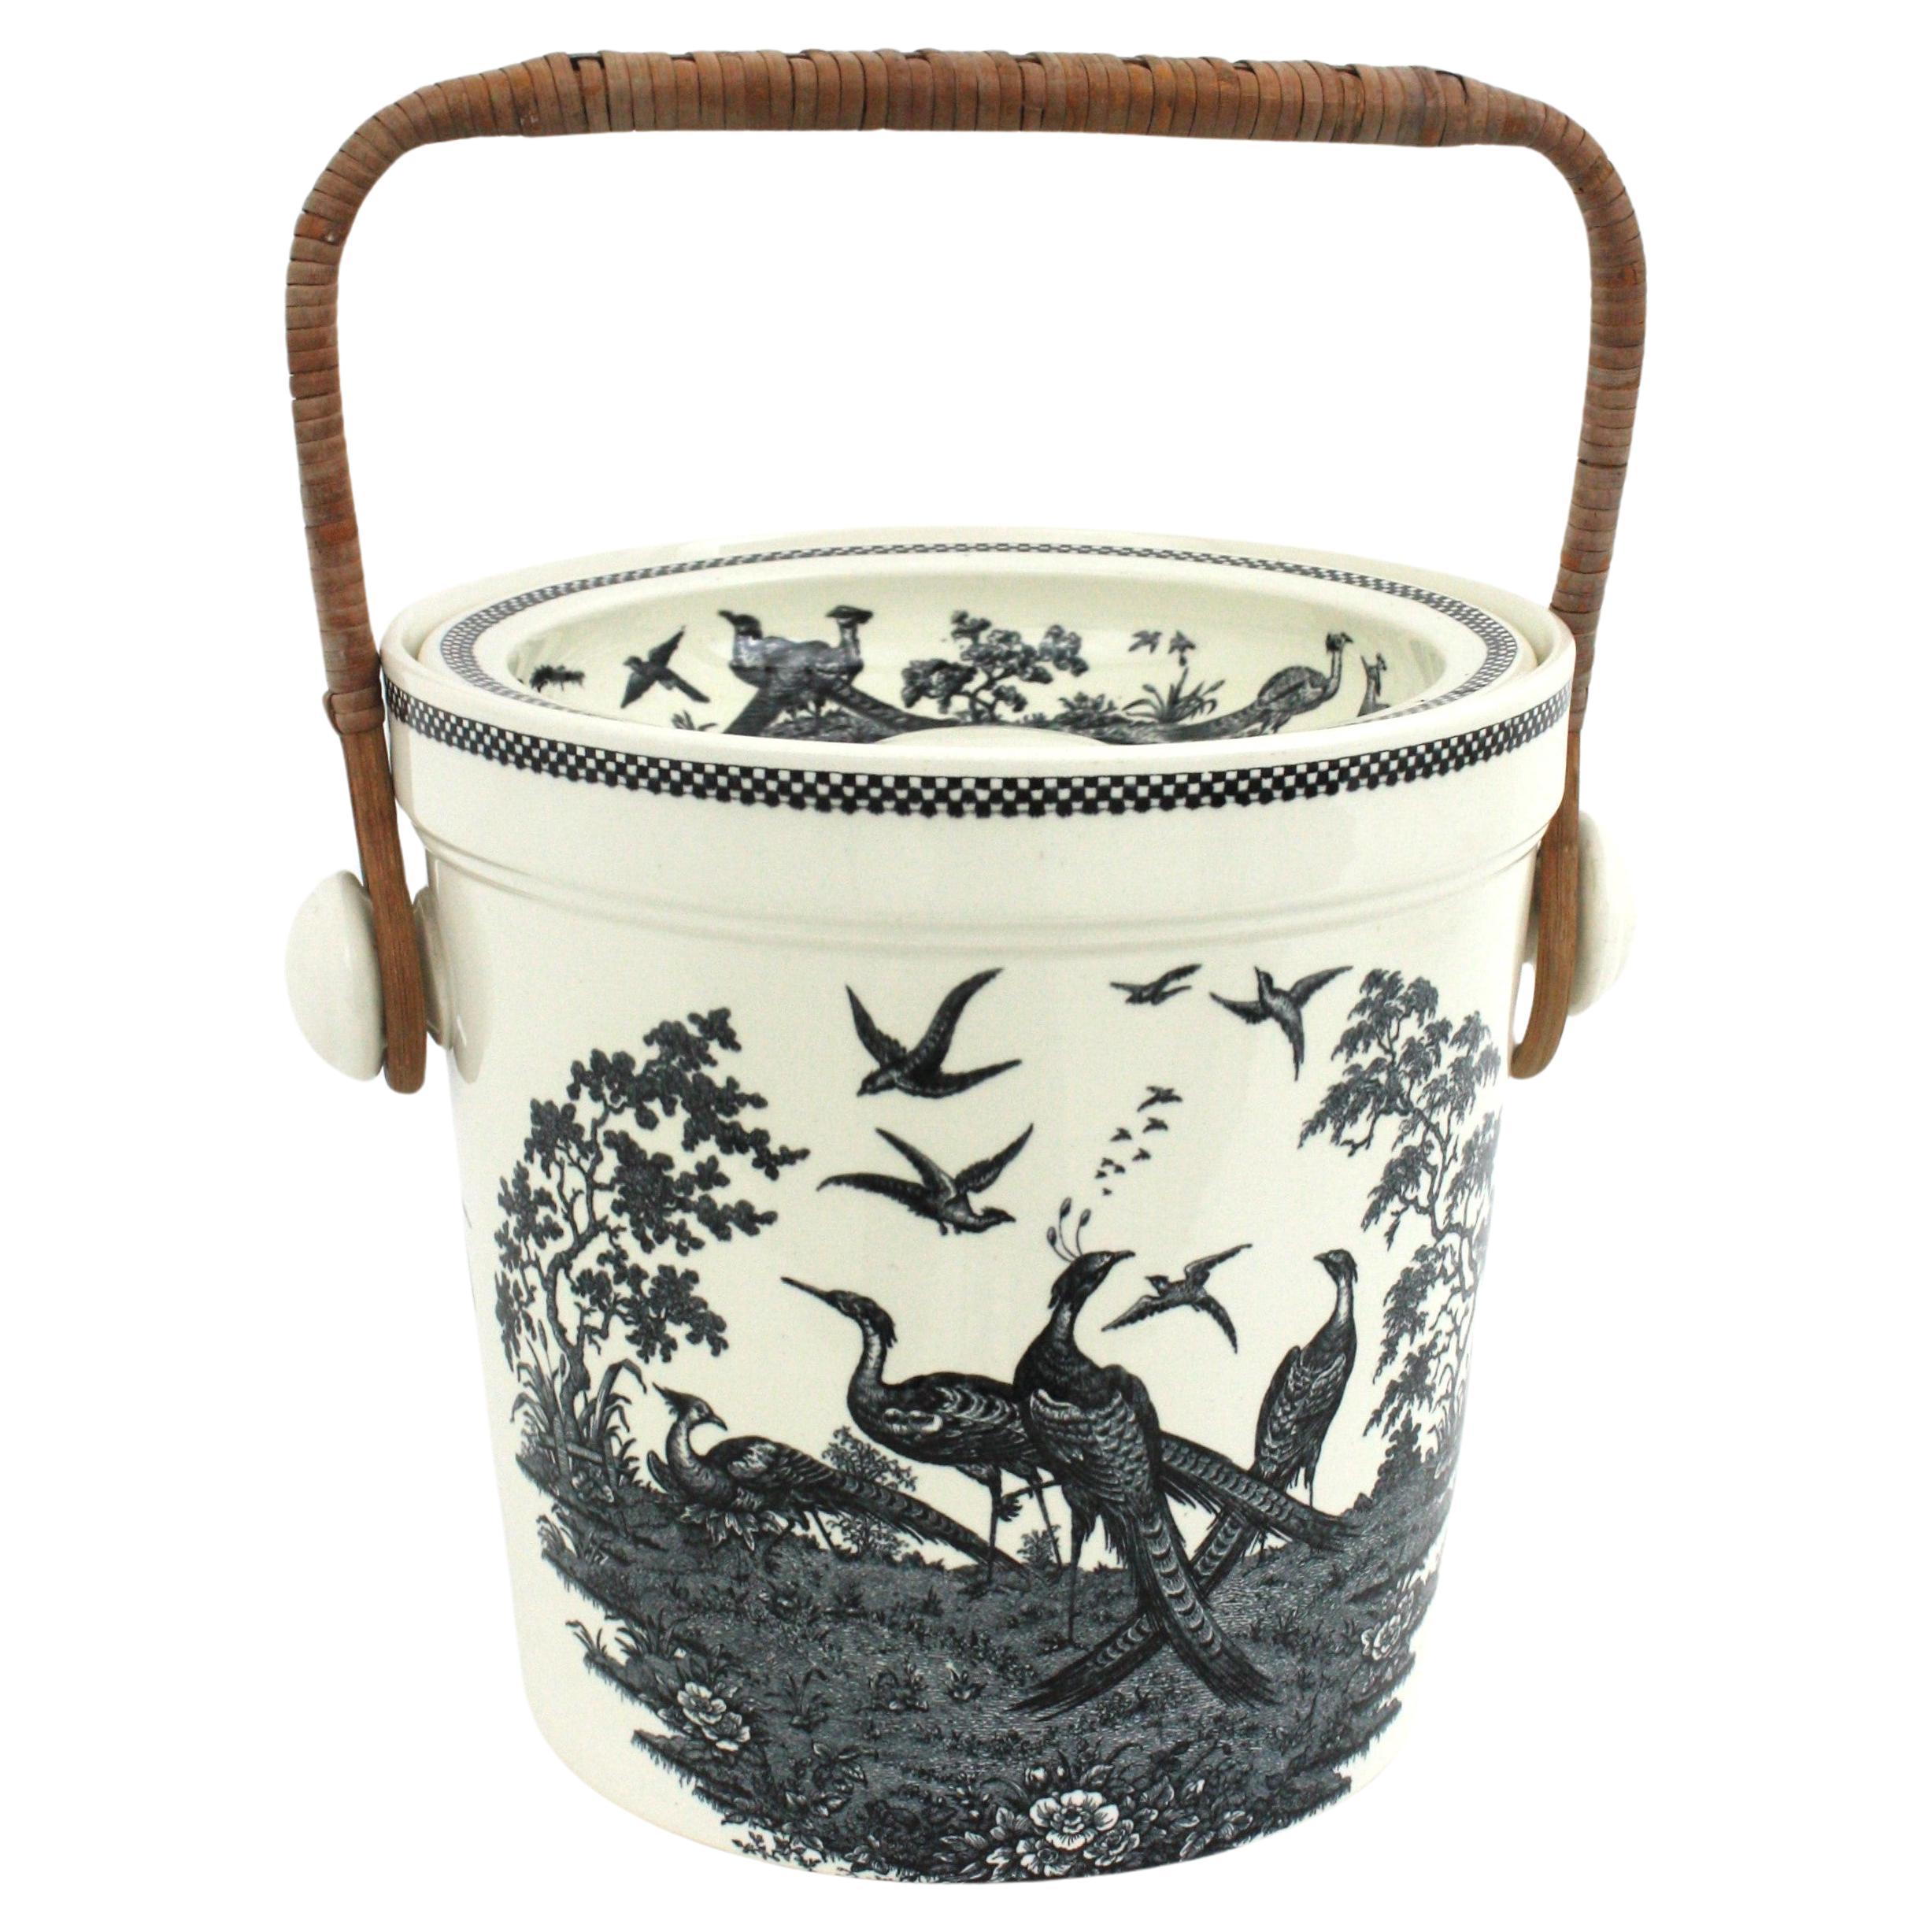 Wedgwood Etruria Porcelain Container Slops Bucket with Cane Handle, England, 1930s.
A Victorian Wedgwood Chinoiserie patterned porcelain slops bucket with an original swinging cane handle and lid. 
Black transferware pheasants landscape